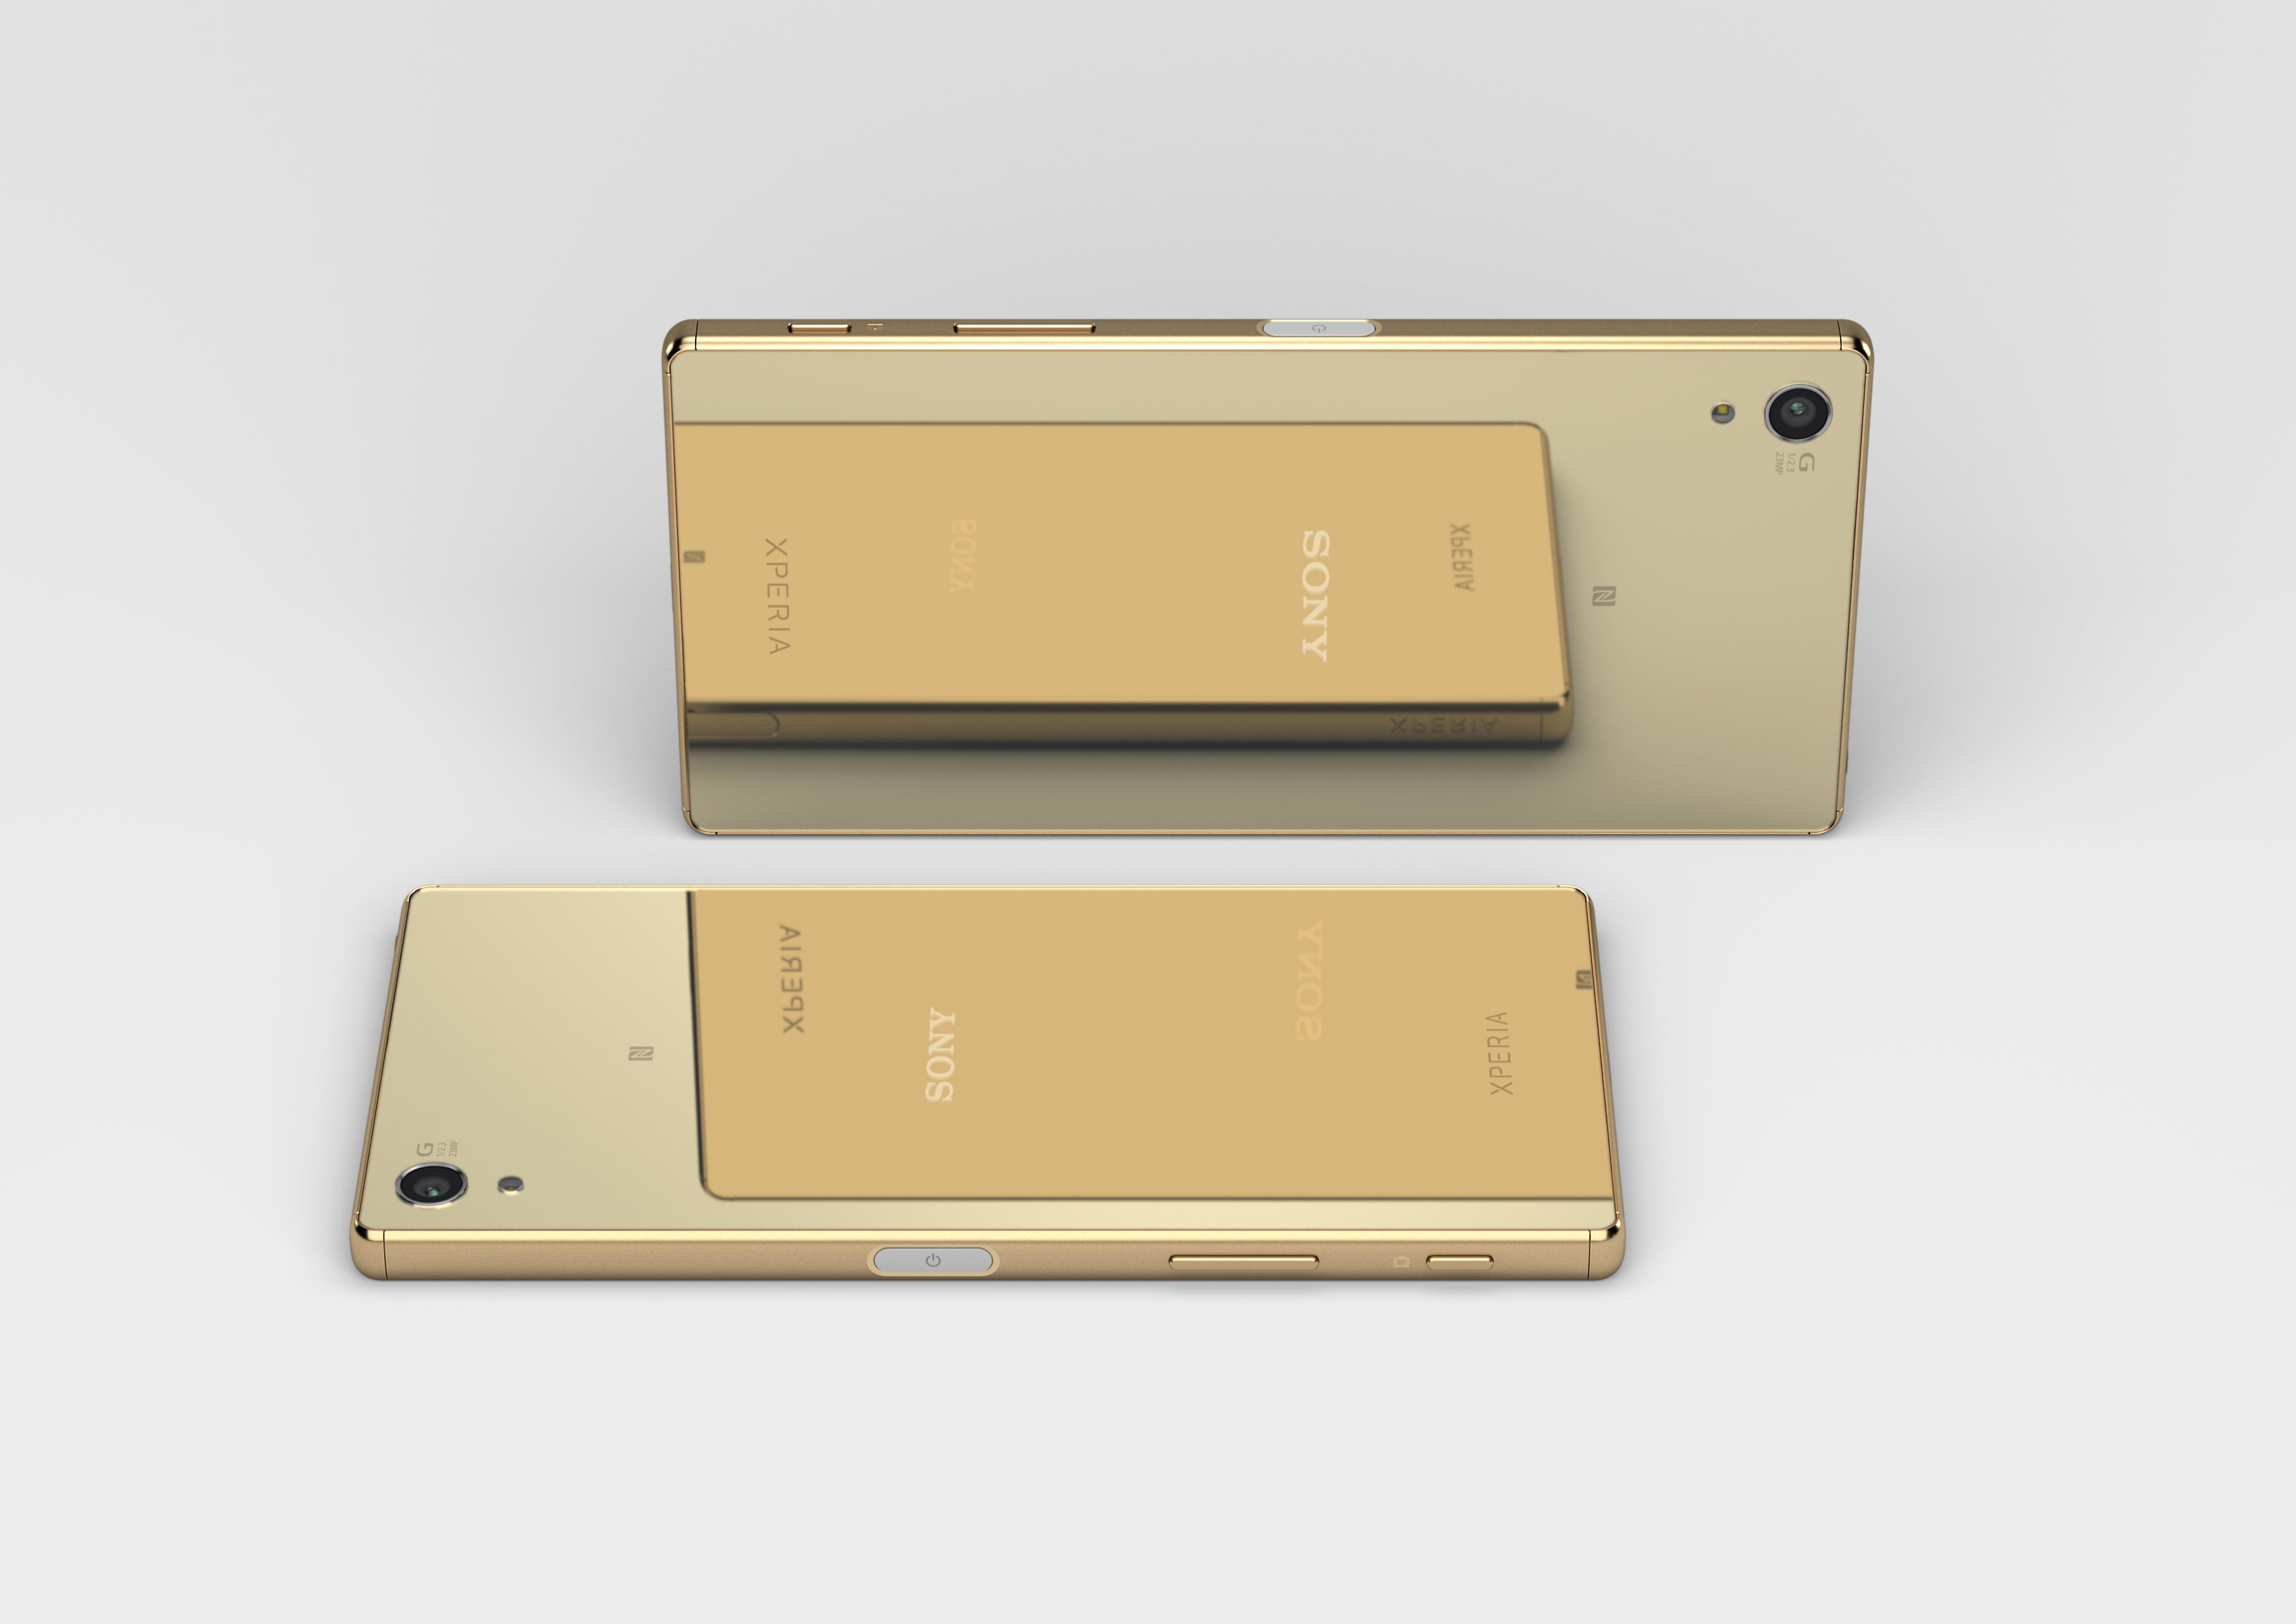 This is why 4K display on Xperia Z5 Premium won't exhaust the battery